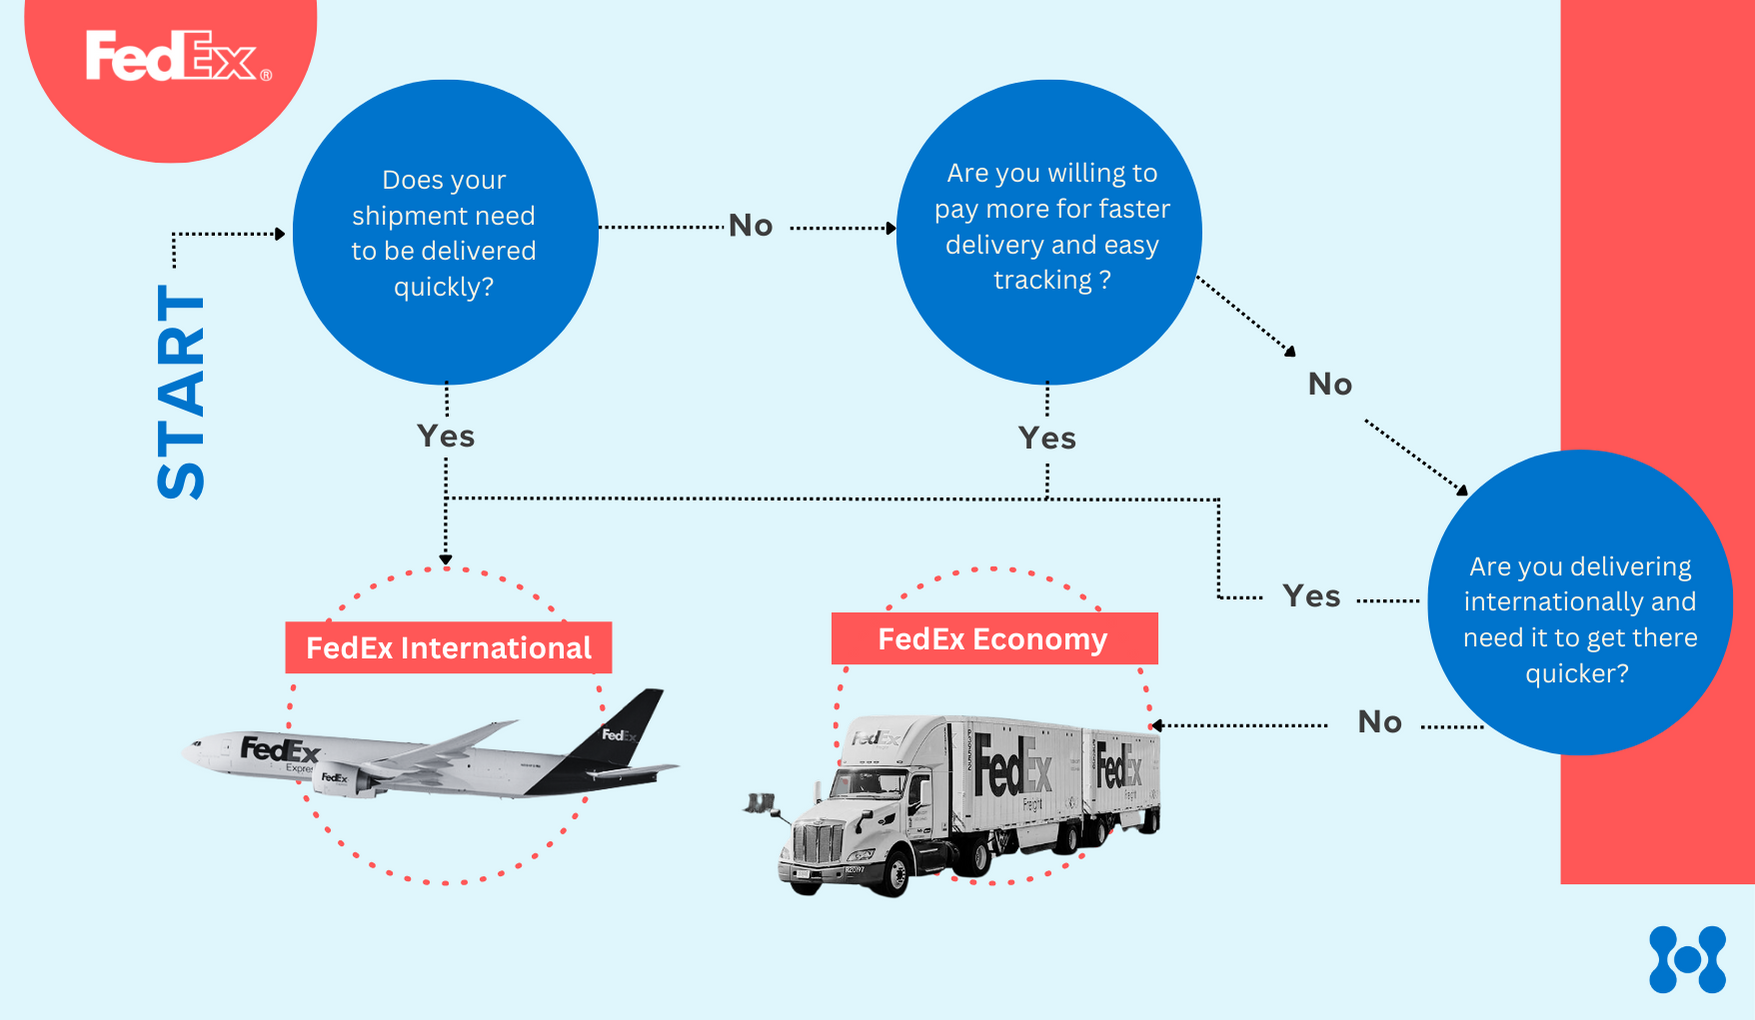 A flow chart is shown highlighting the differences between fedex international priority vs economy.